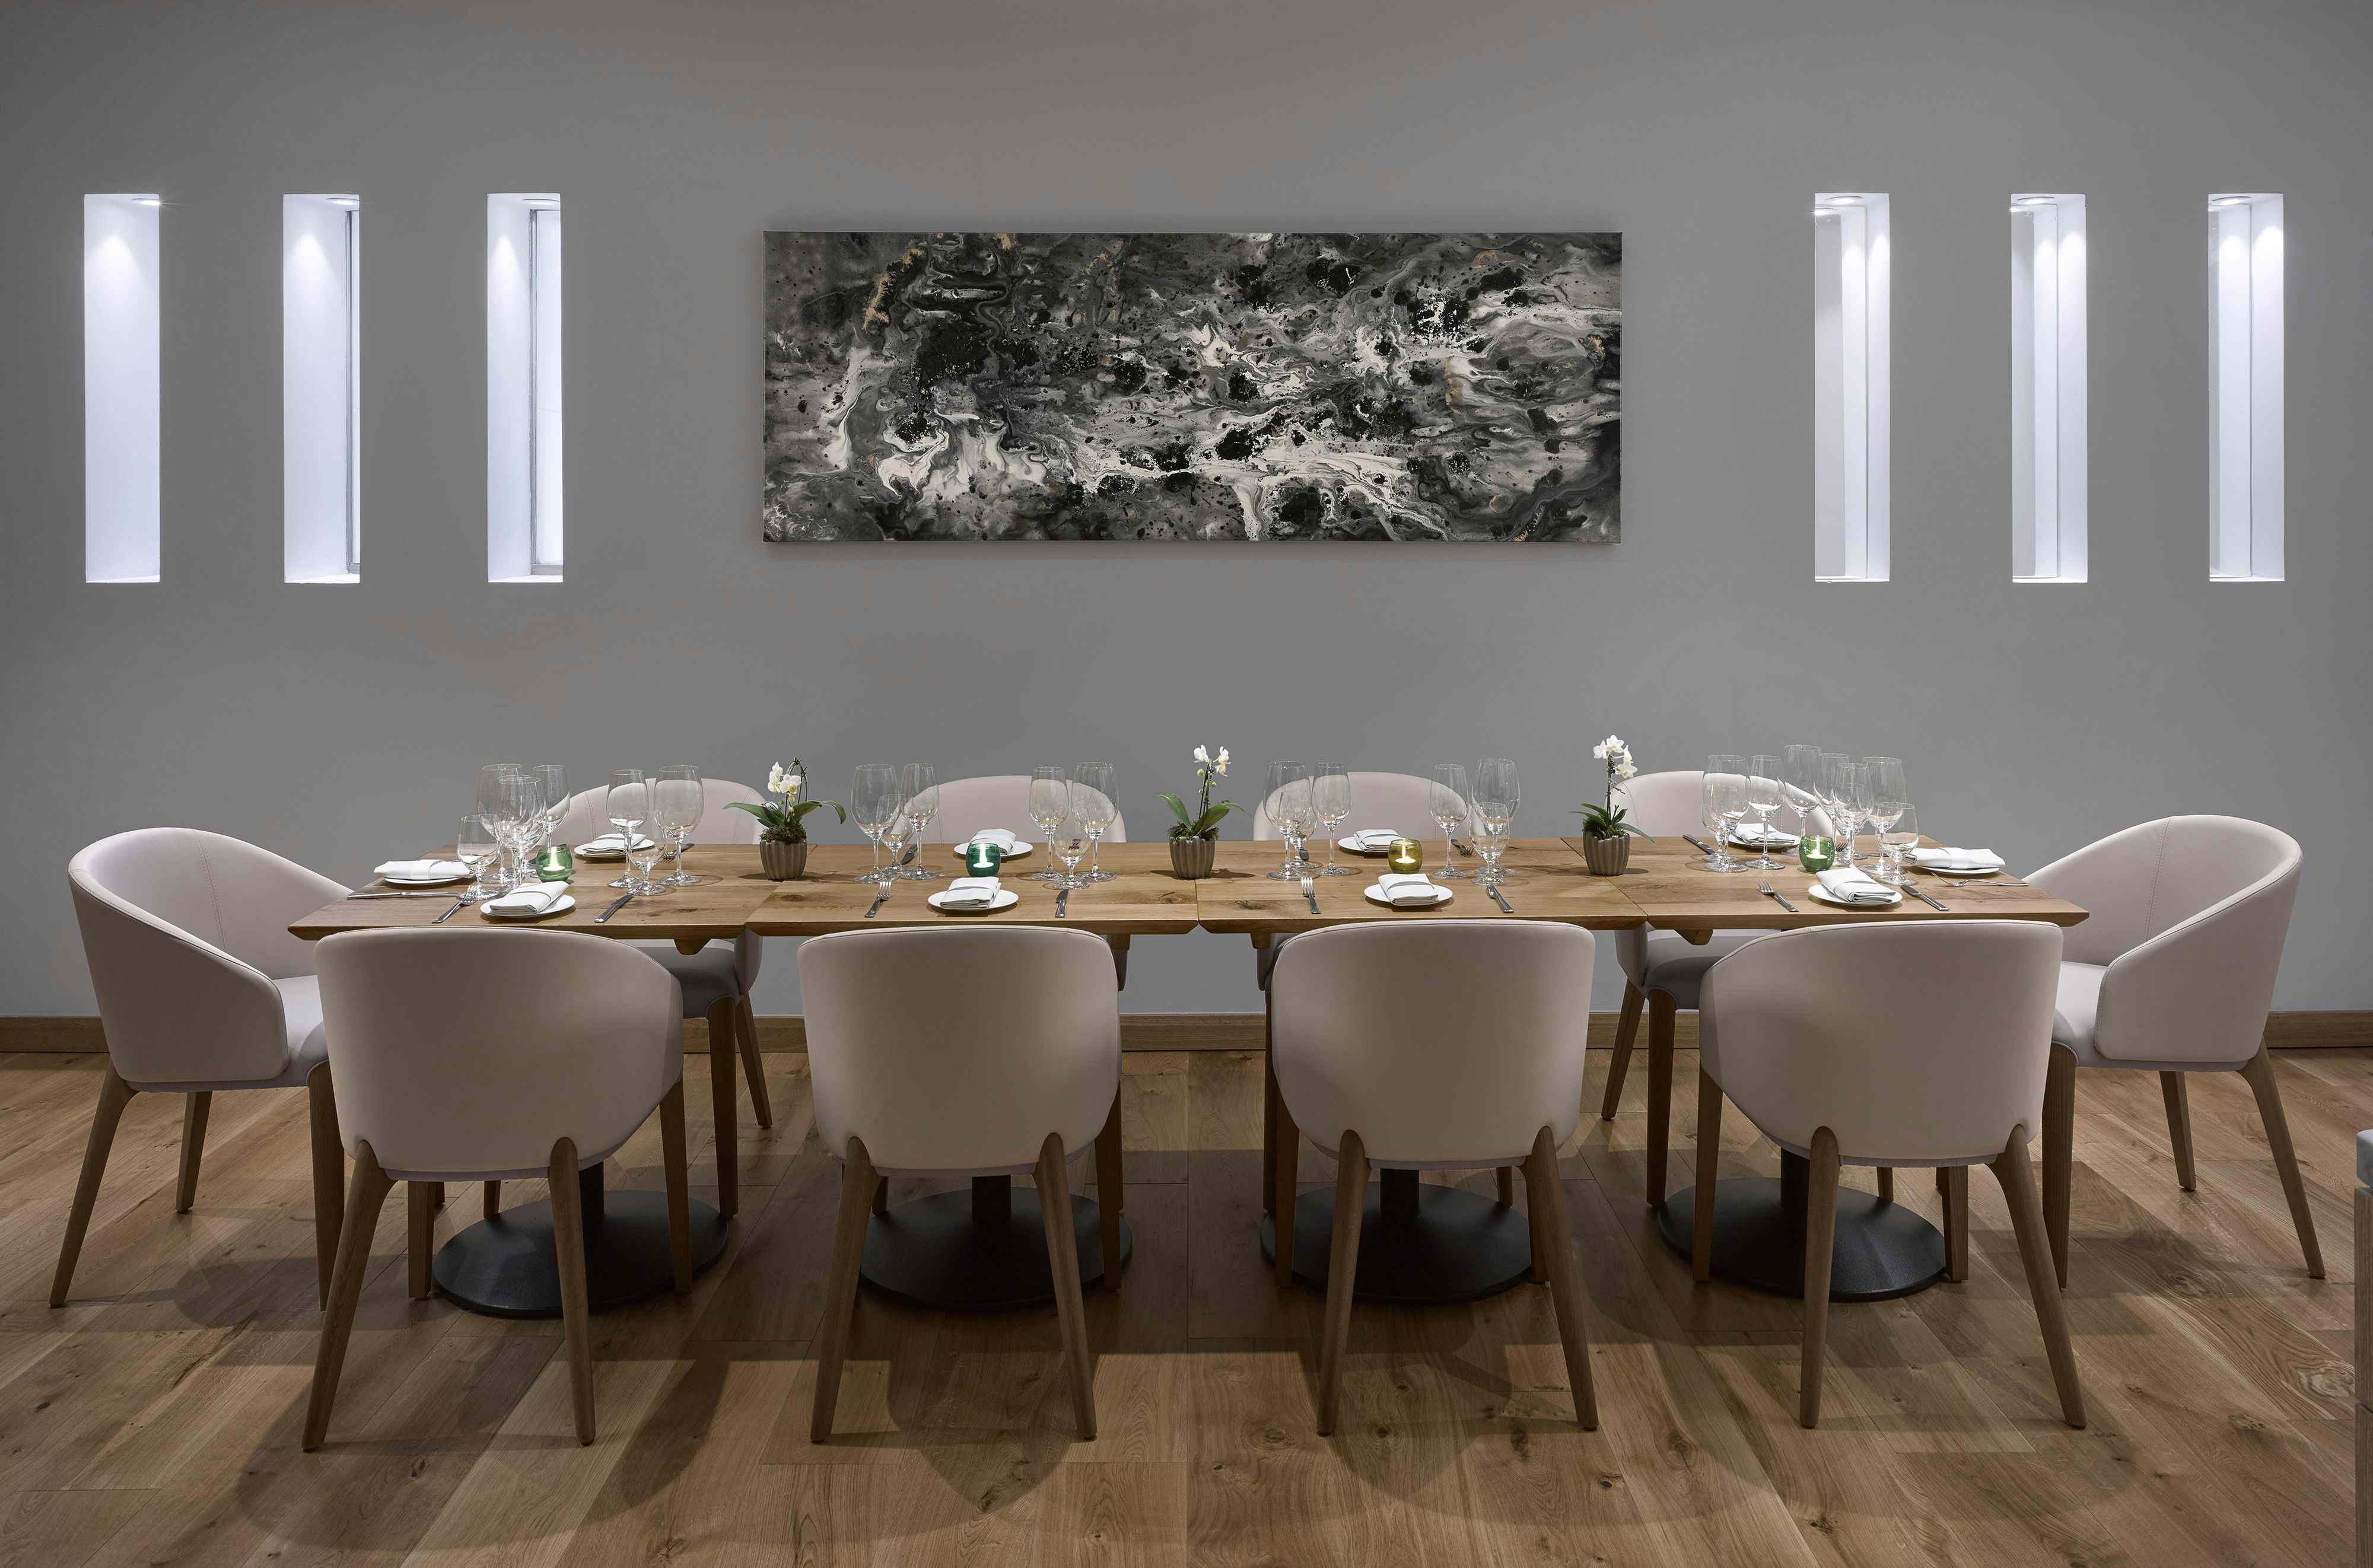 Private Dining Room -  Theo Randall, Theo Randall at Intercontinental London Park Lane